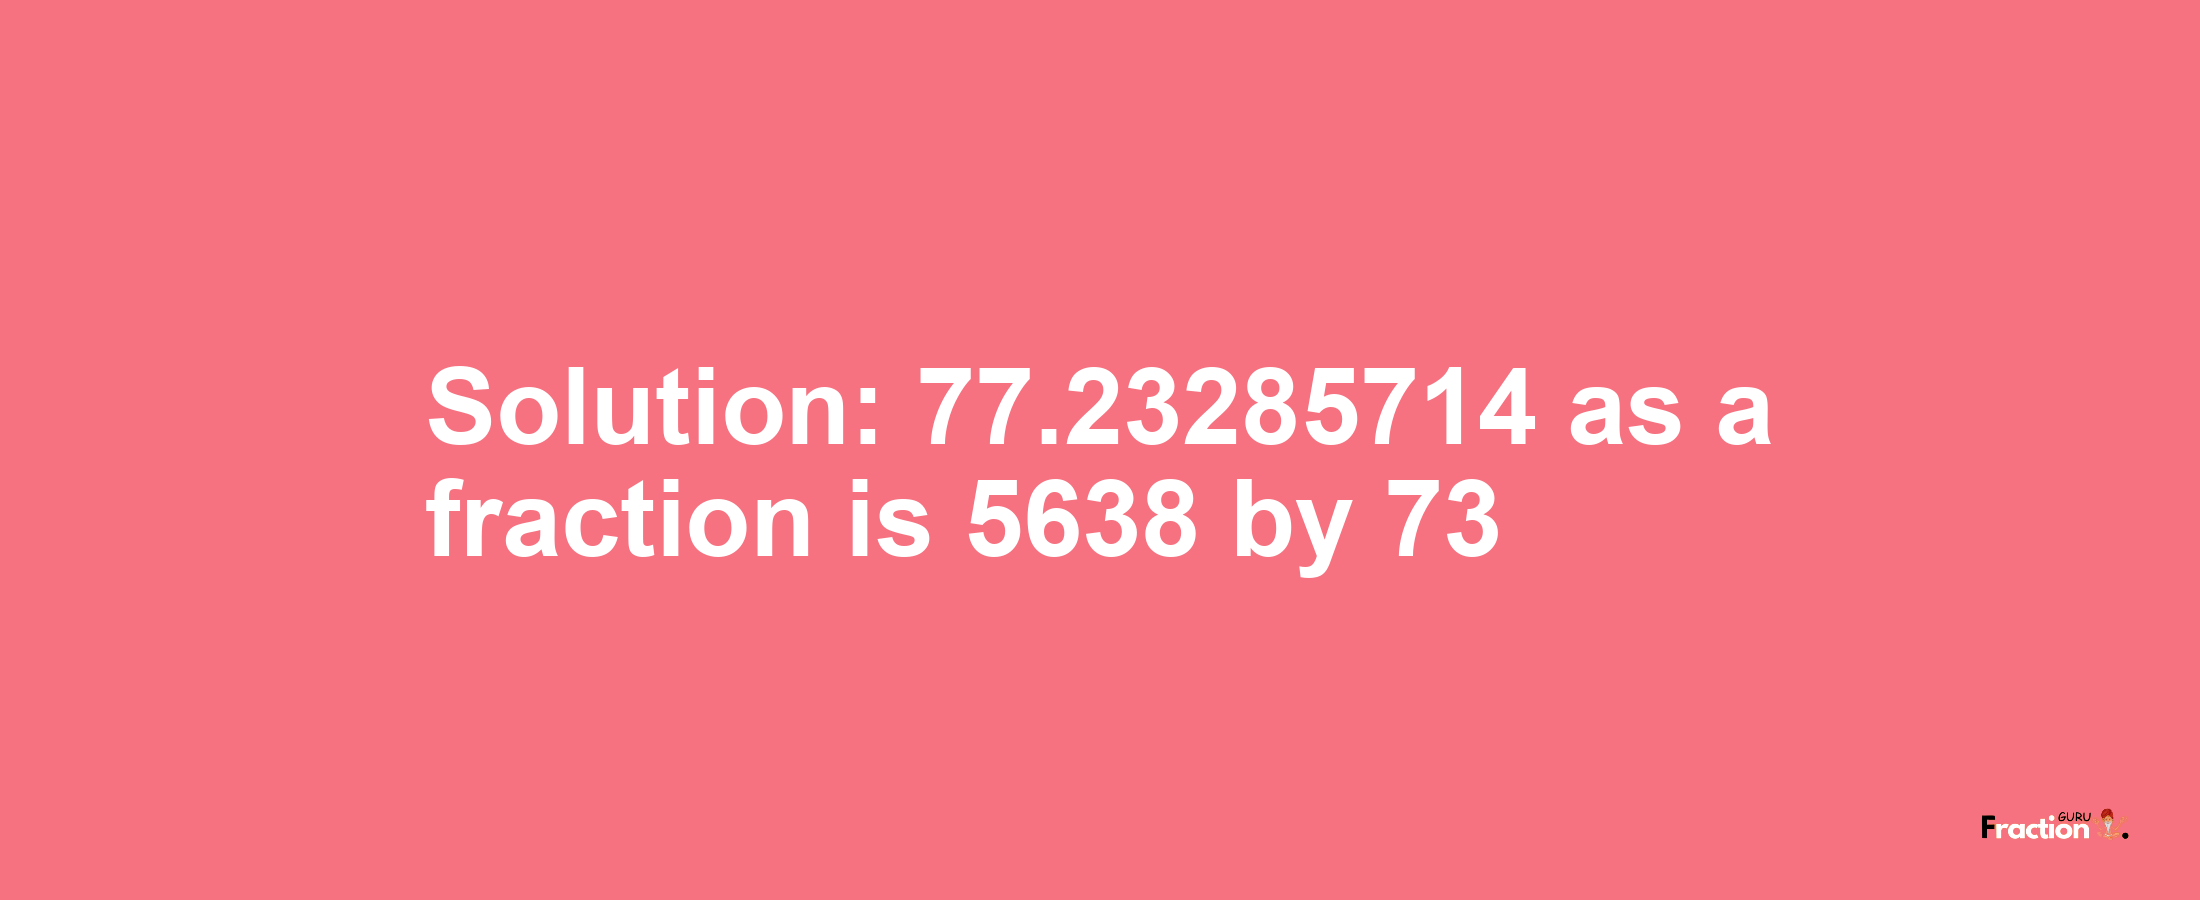 Solution:77.23285714 as a fraction is 5638/73